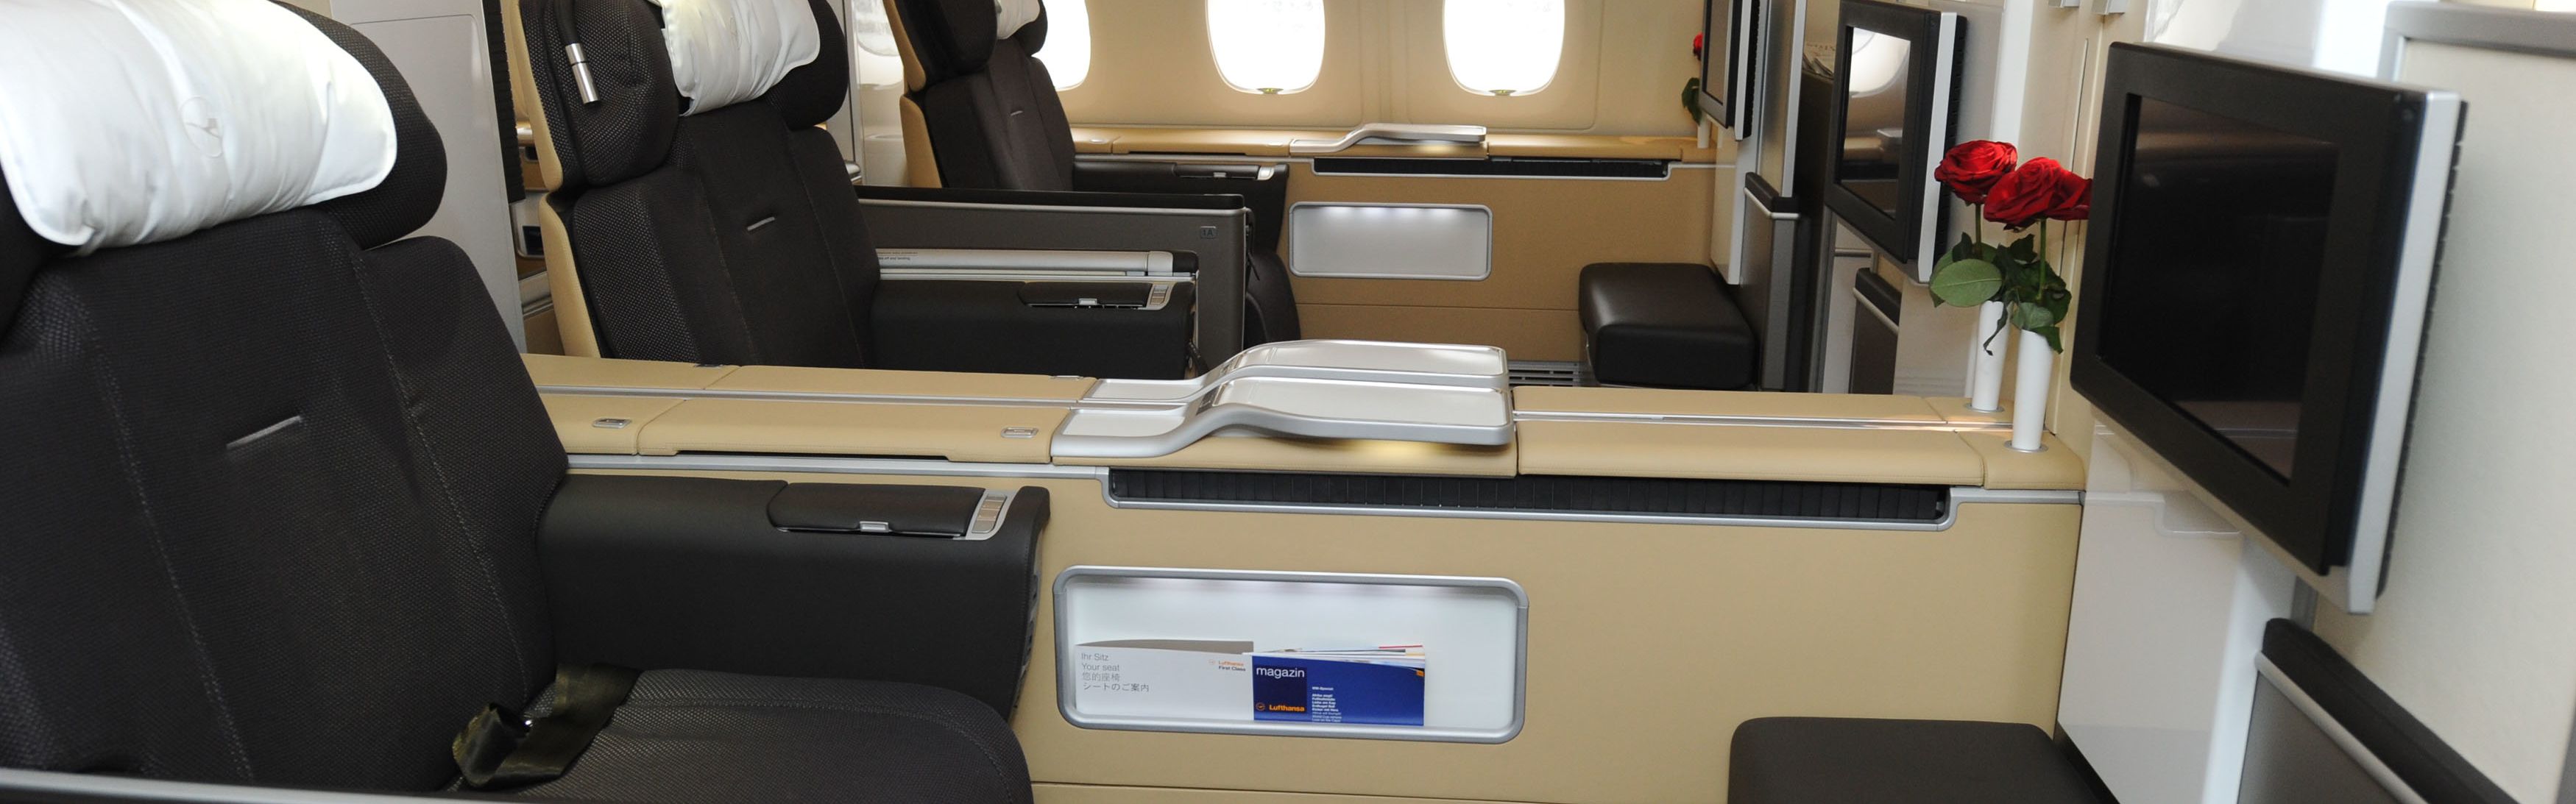 First-class vs. business: Worth the extra cost? | CNN